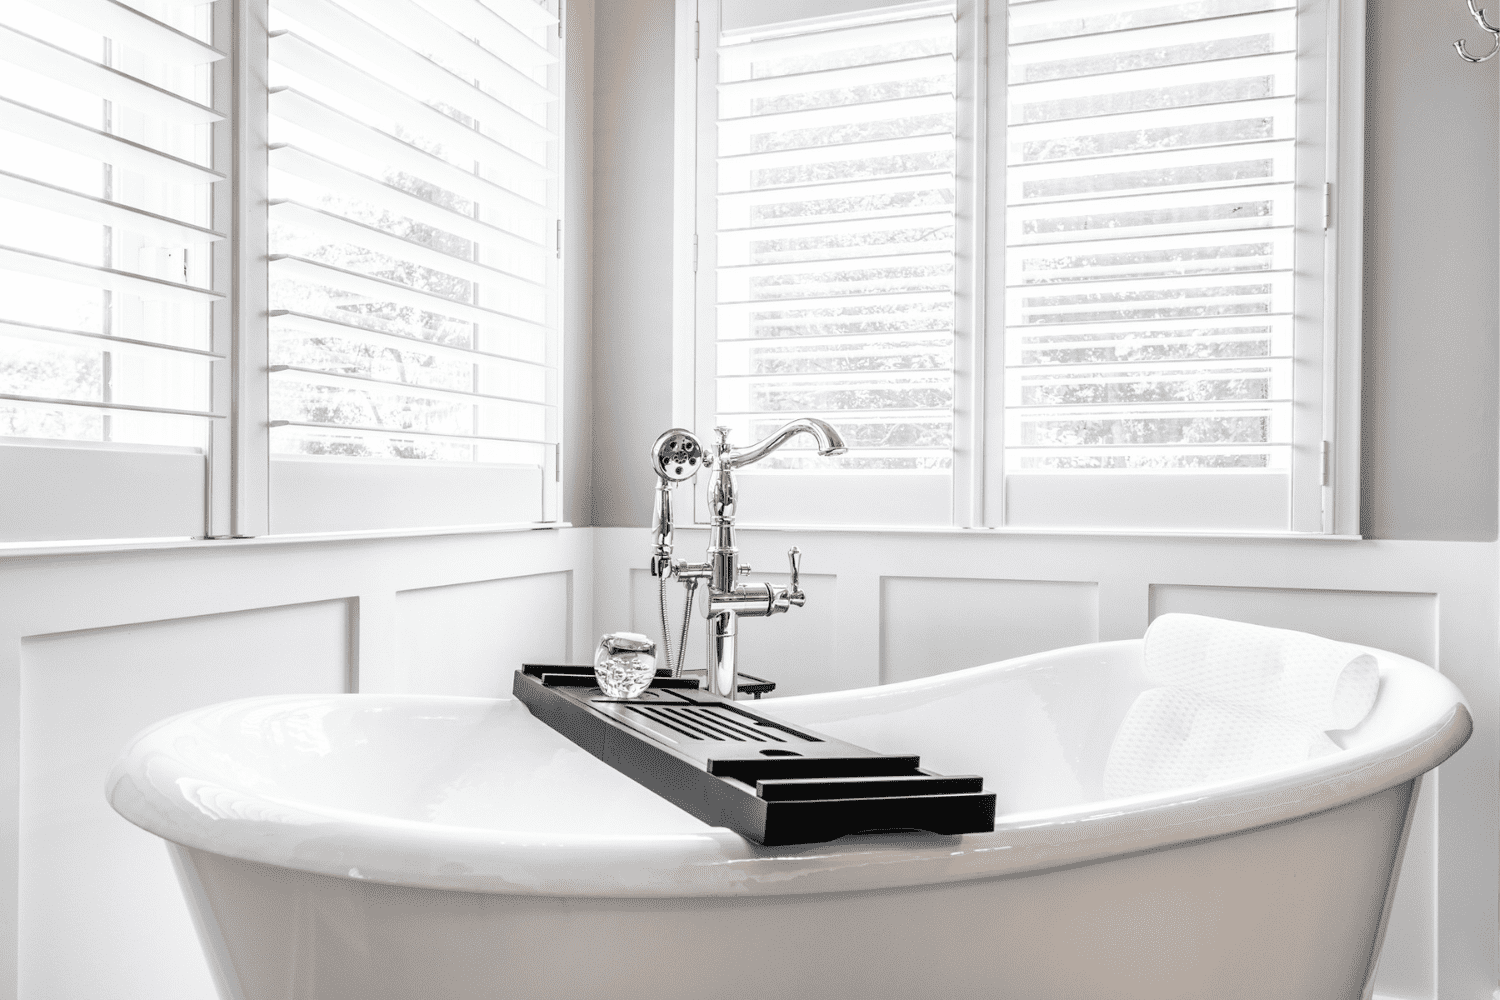 Nicholas Design Build | Master bath remodel: A stunning black and white photo capturing a beautifully renovated bathtub with charming shutters.